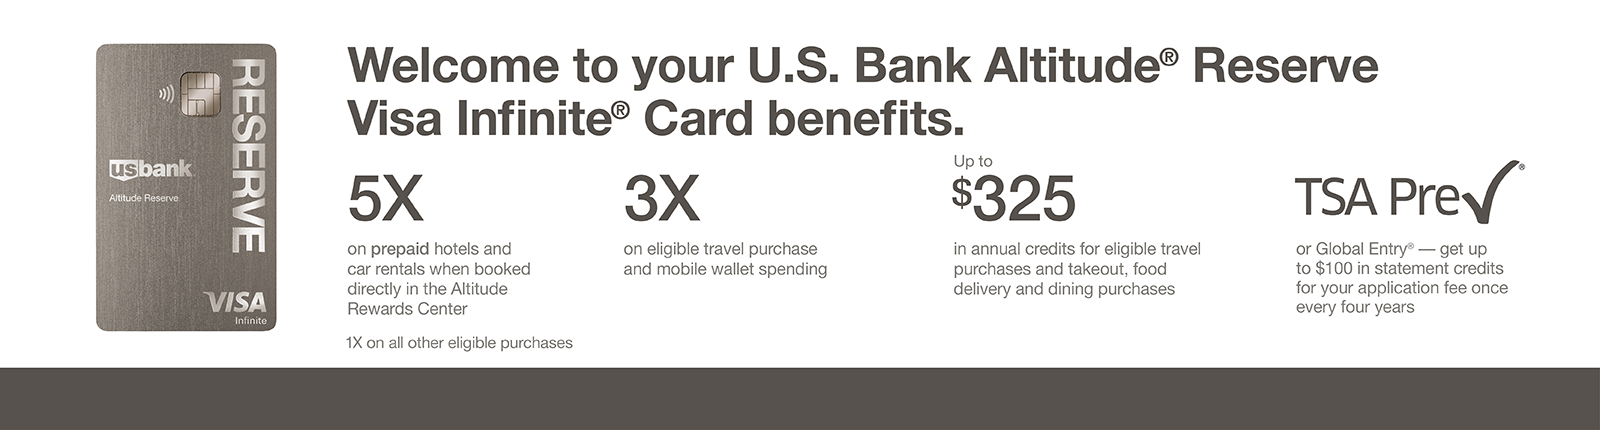 Welcome to your U.S. Bank Altitude Reserve Visa Infinite Card Benefits